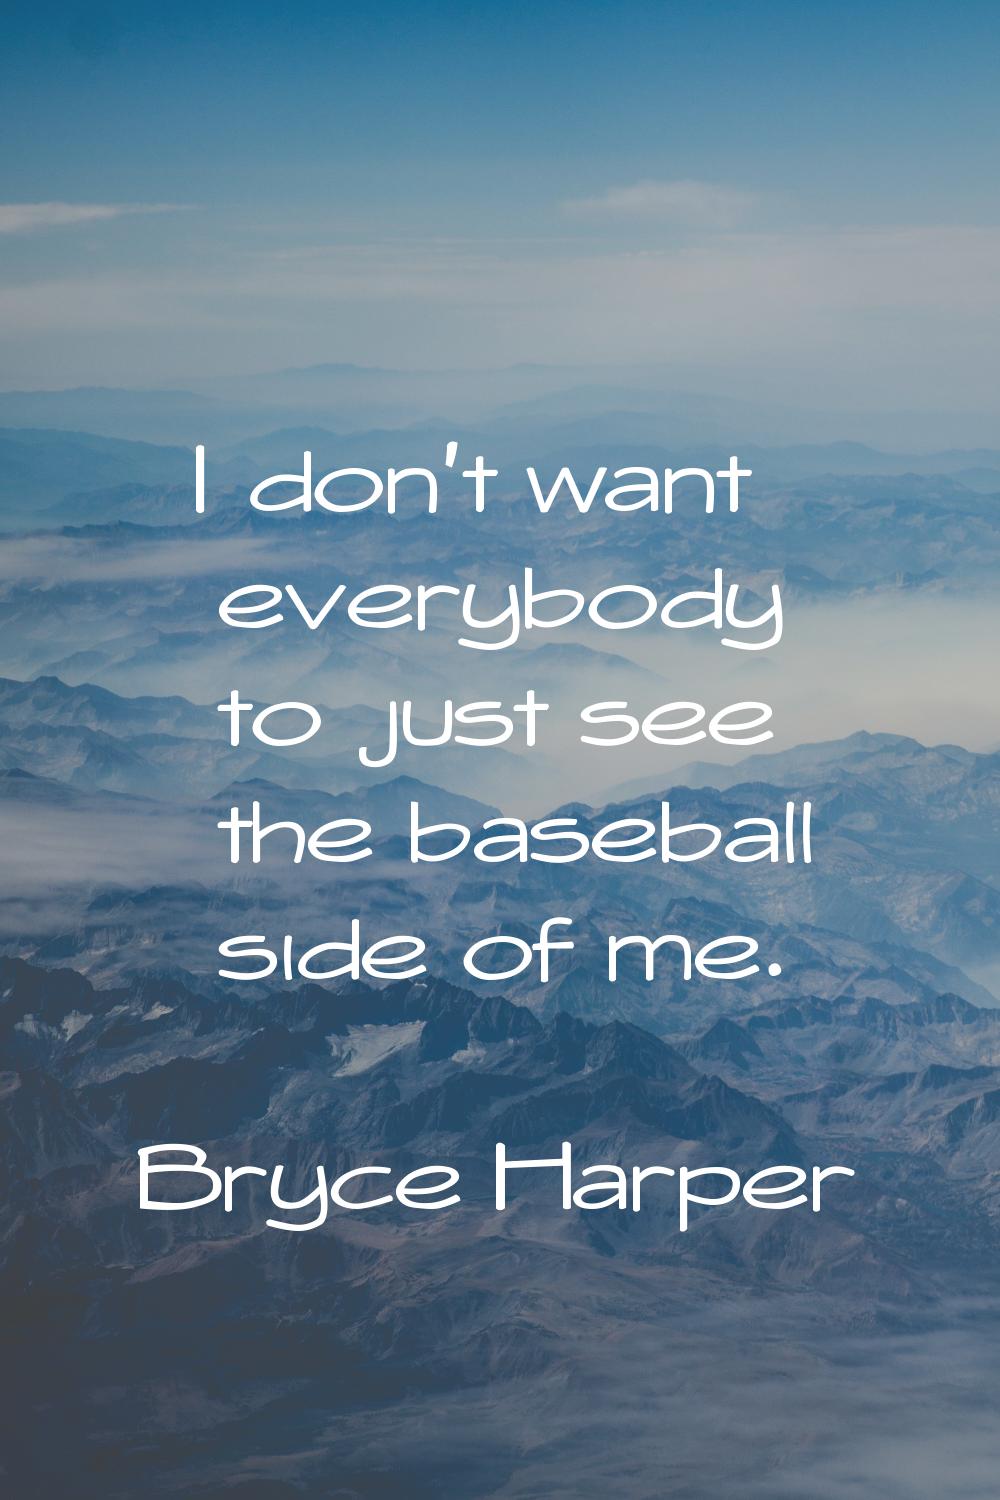 I don't want everybody to just see the baseball side of me.